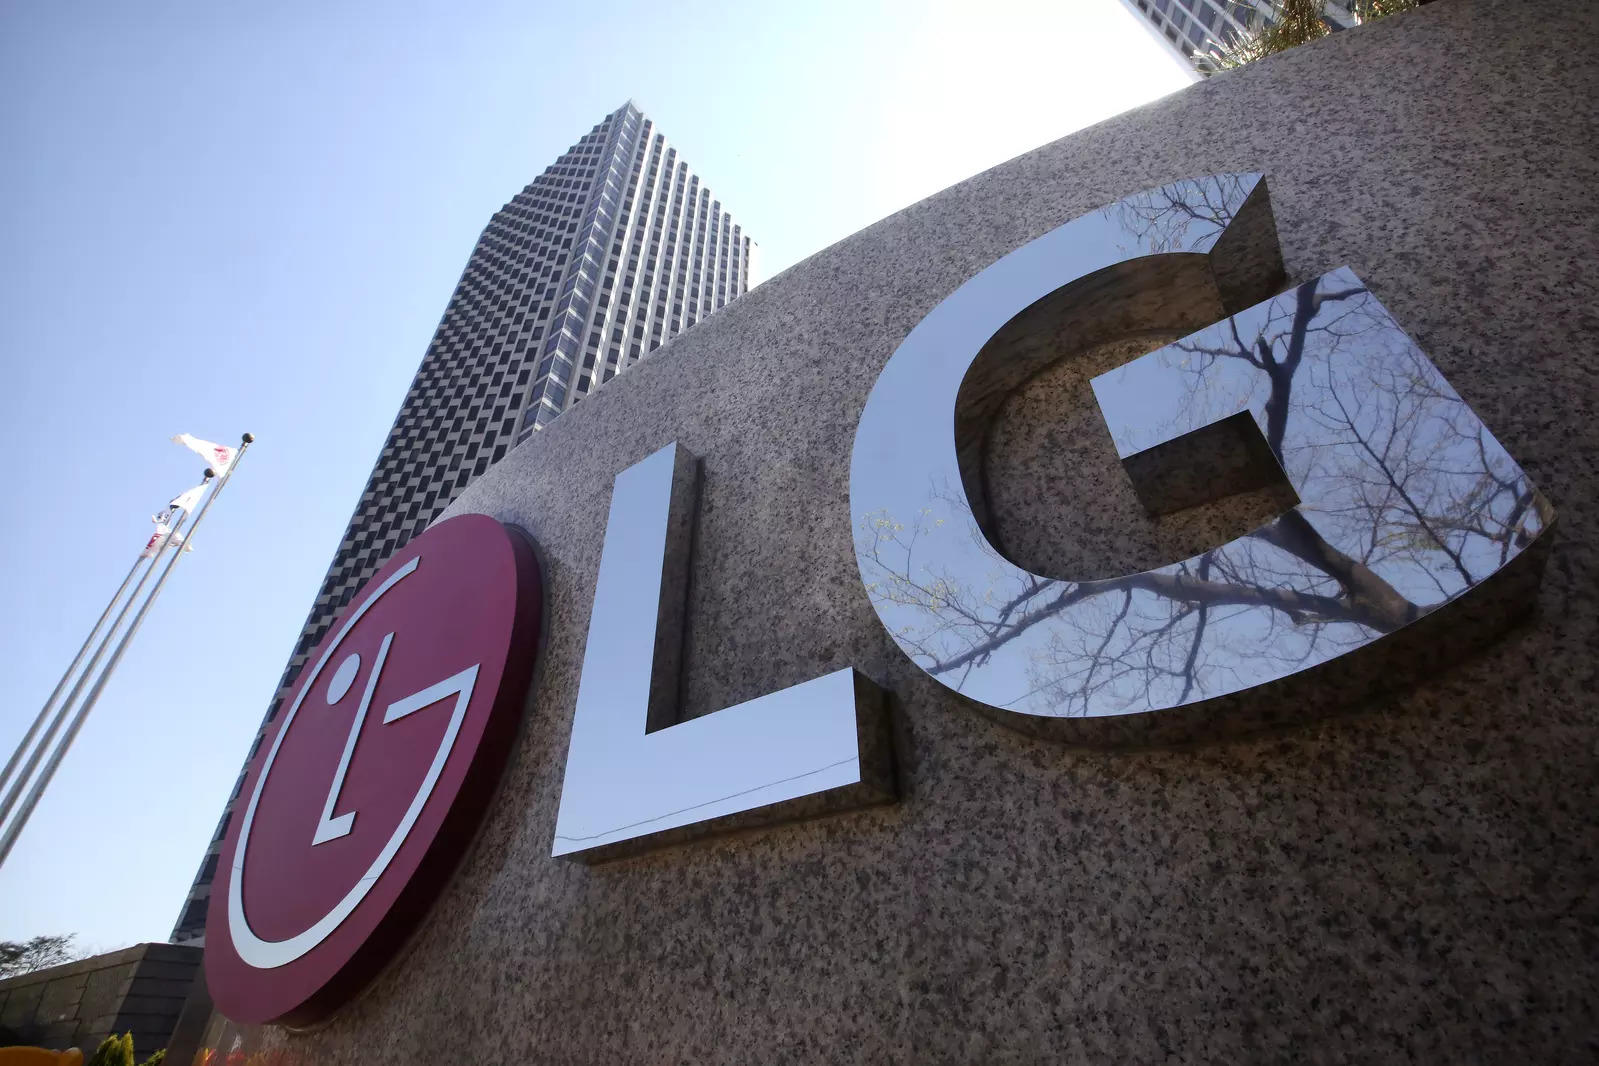     LG, India's largest home appliance maker, has less than 1% share in the Indian smartphone market.  According to mobile industry tracker Counterpoint Researcher, LG gained a share of 0.3% in 2020, which improved slightly from 0.15% in 2019 due to a good performance in the recent festive sale.